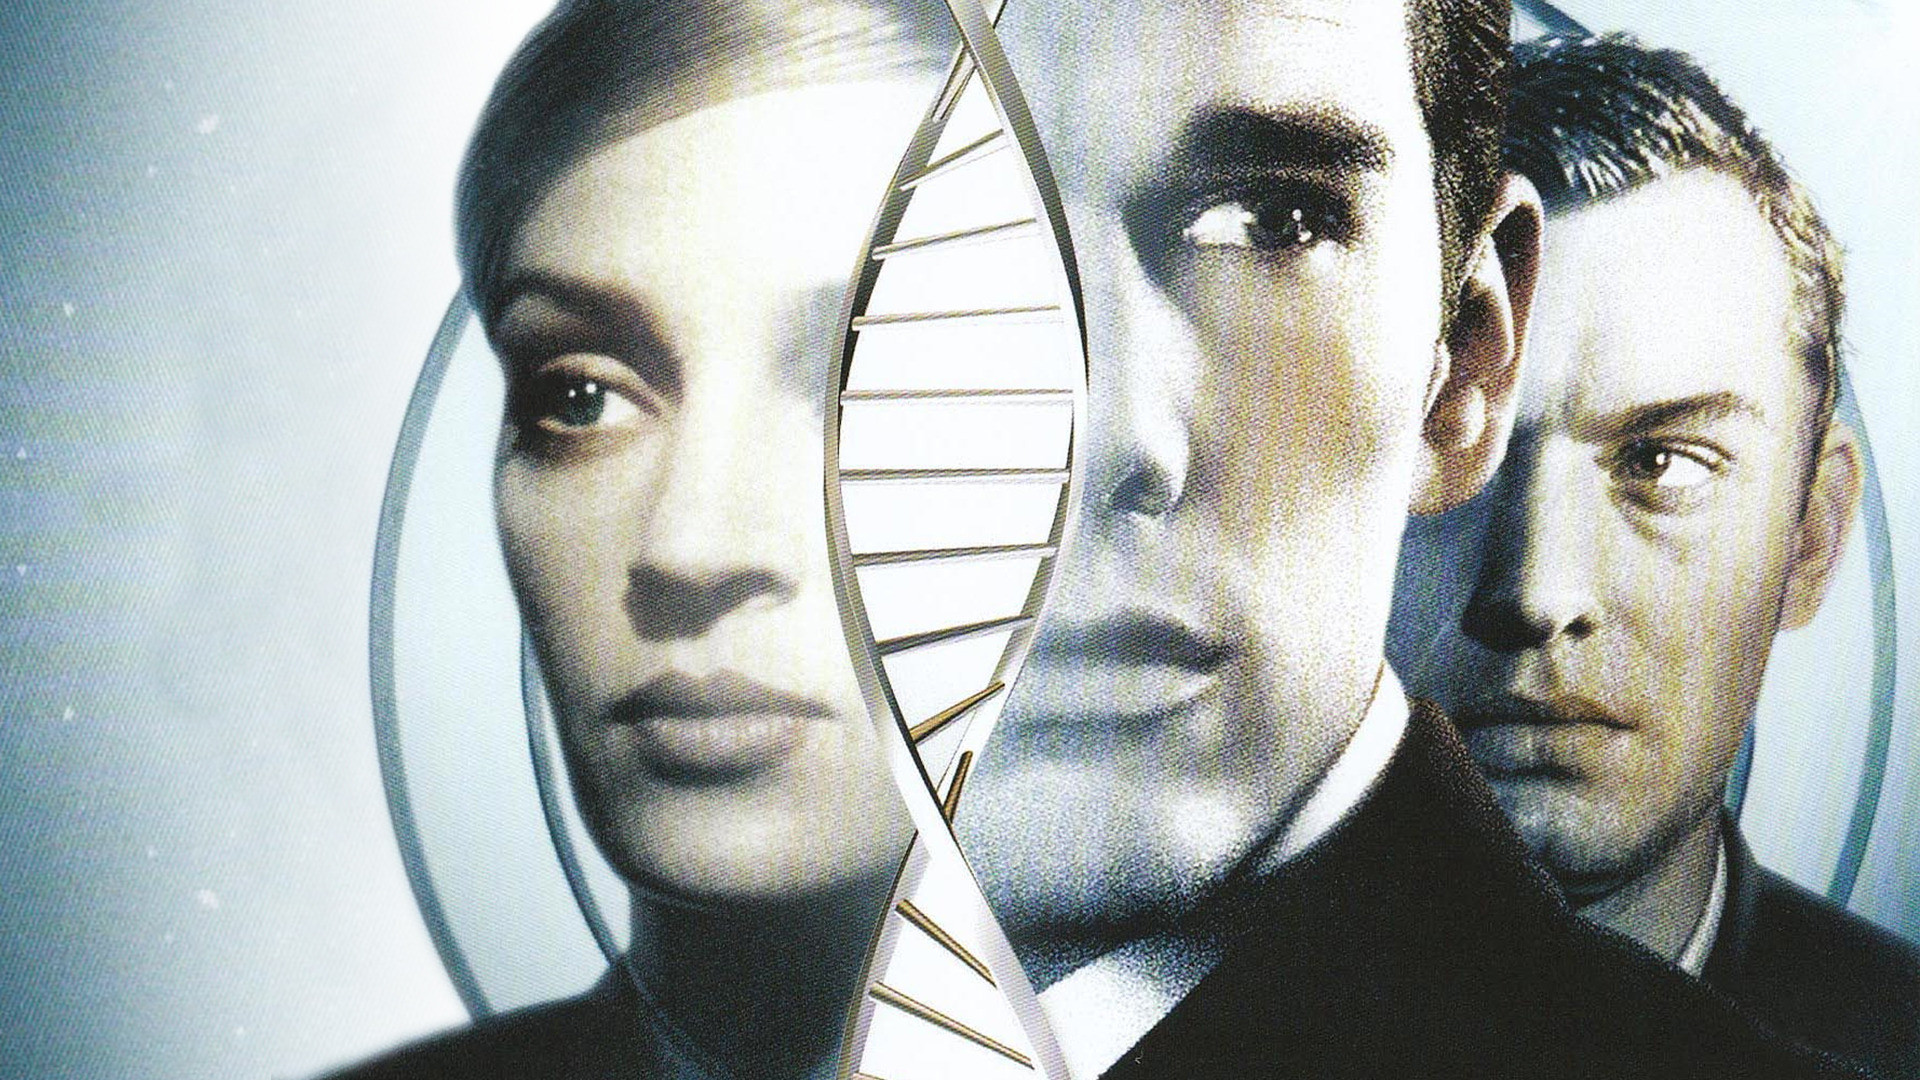 Gattaca becomes reality as scientists start to screen, abort human babies based on 3,500 ‘genetic faults’